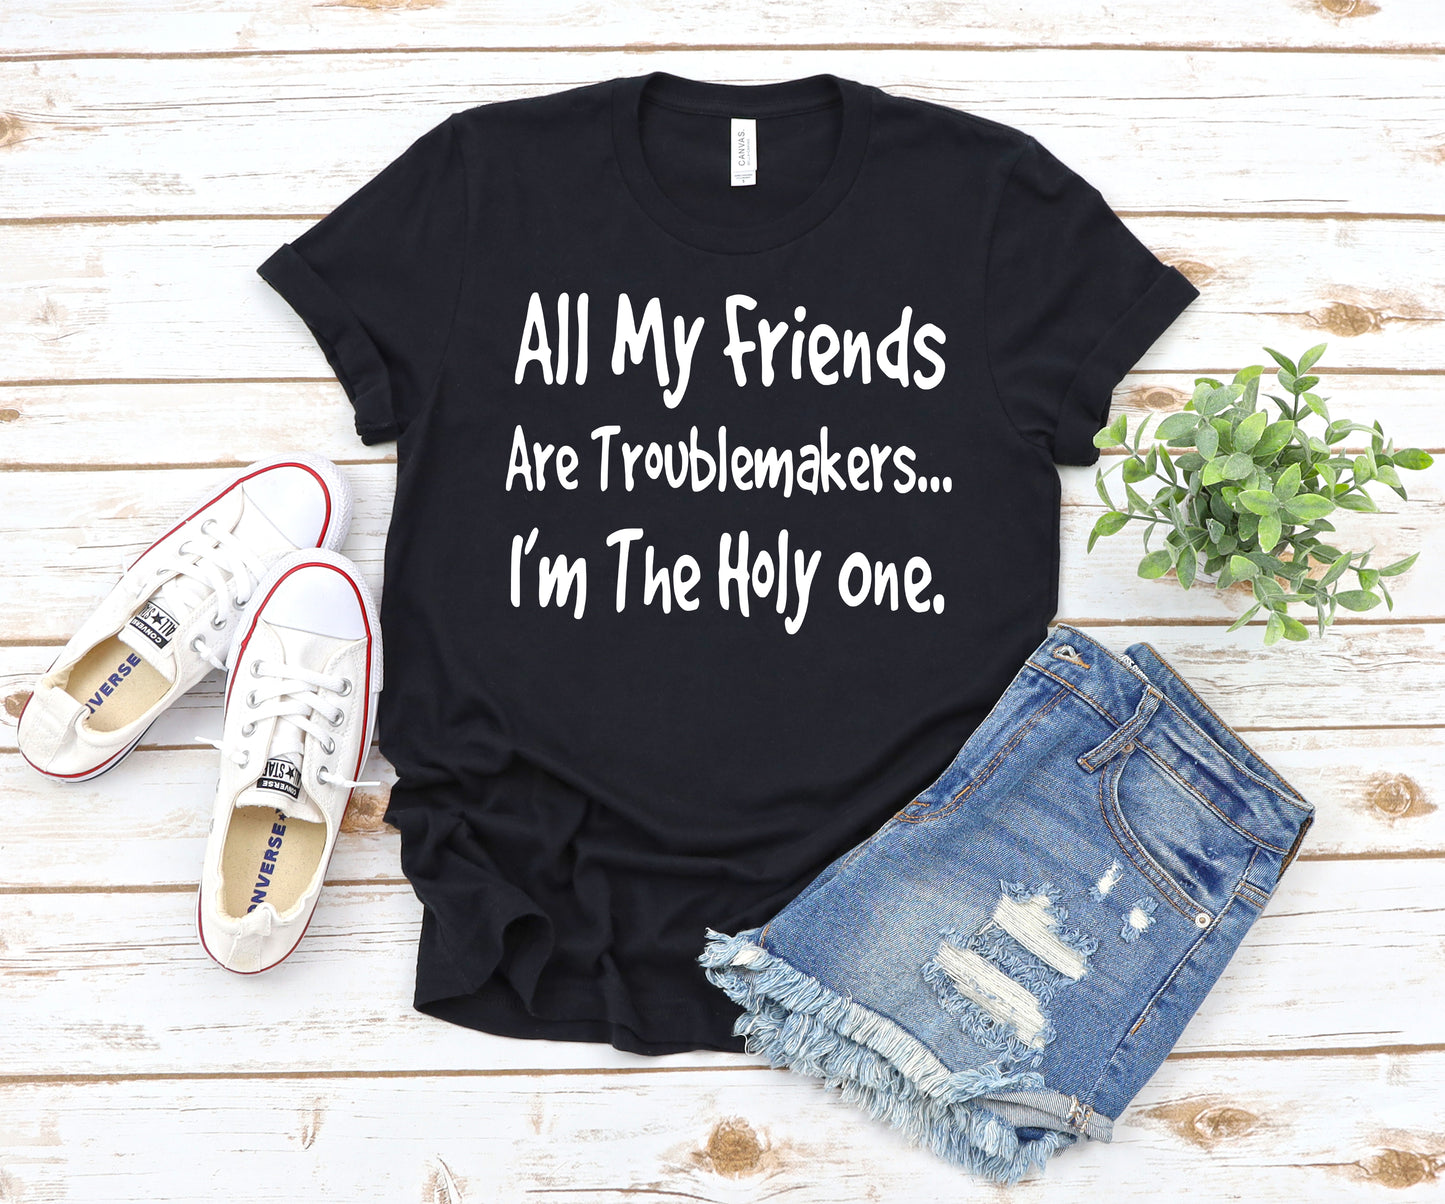 All of my friends are trouble makers I'm the holy one